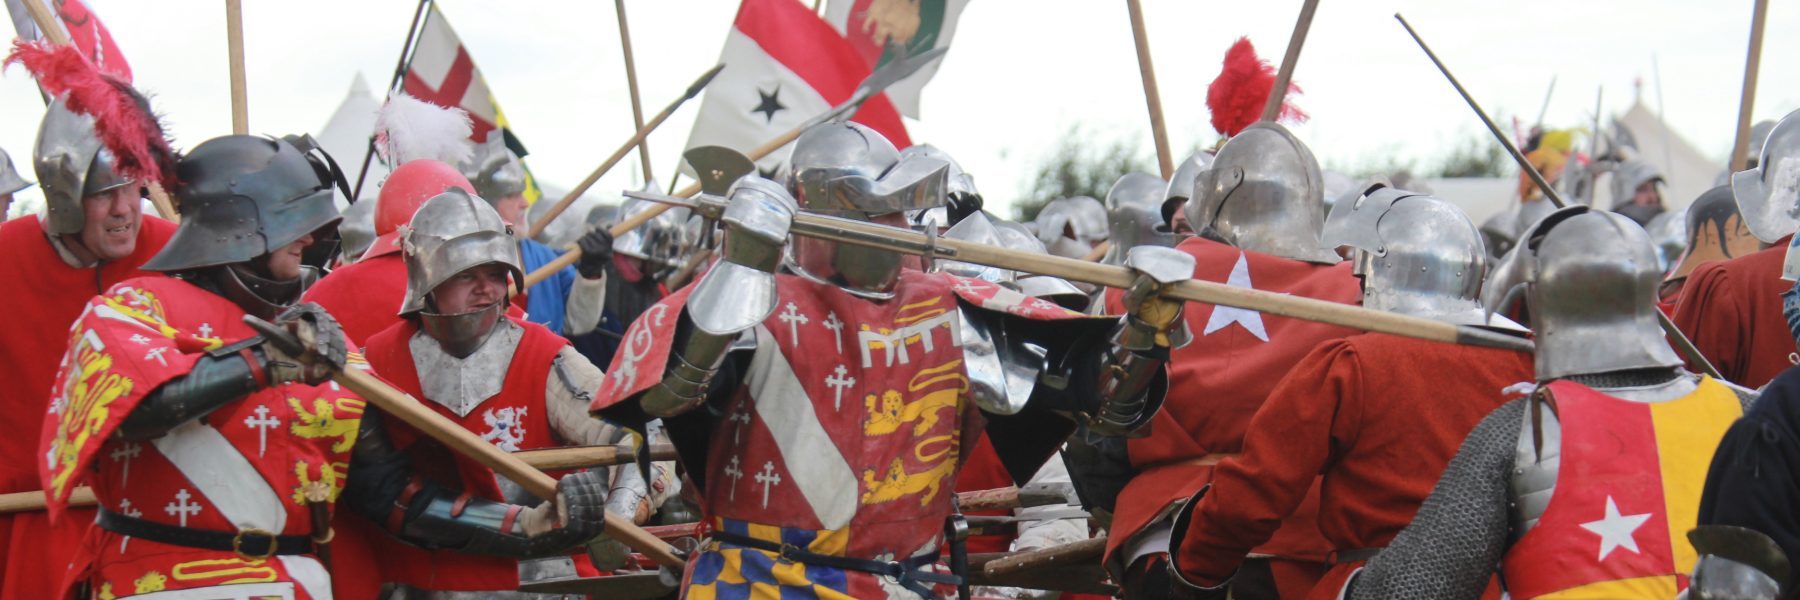 Knights and soldiers fighting in the re-enactment of the Battle of Bosworth, which will happen again on the 17th and 18th August